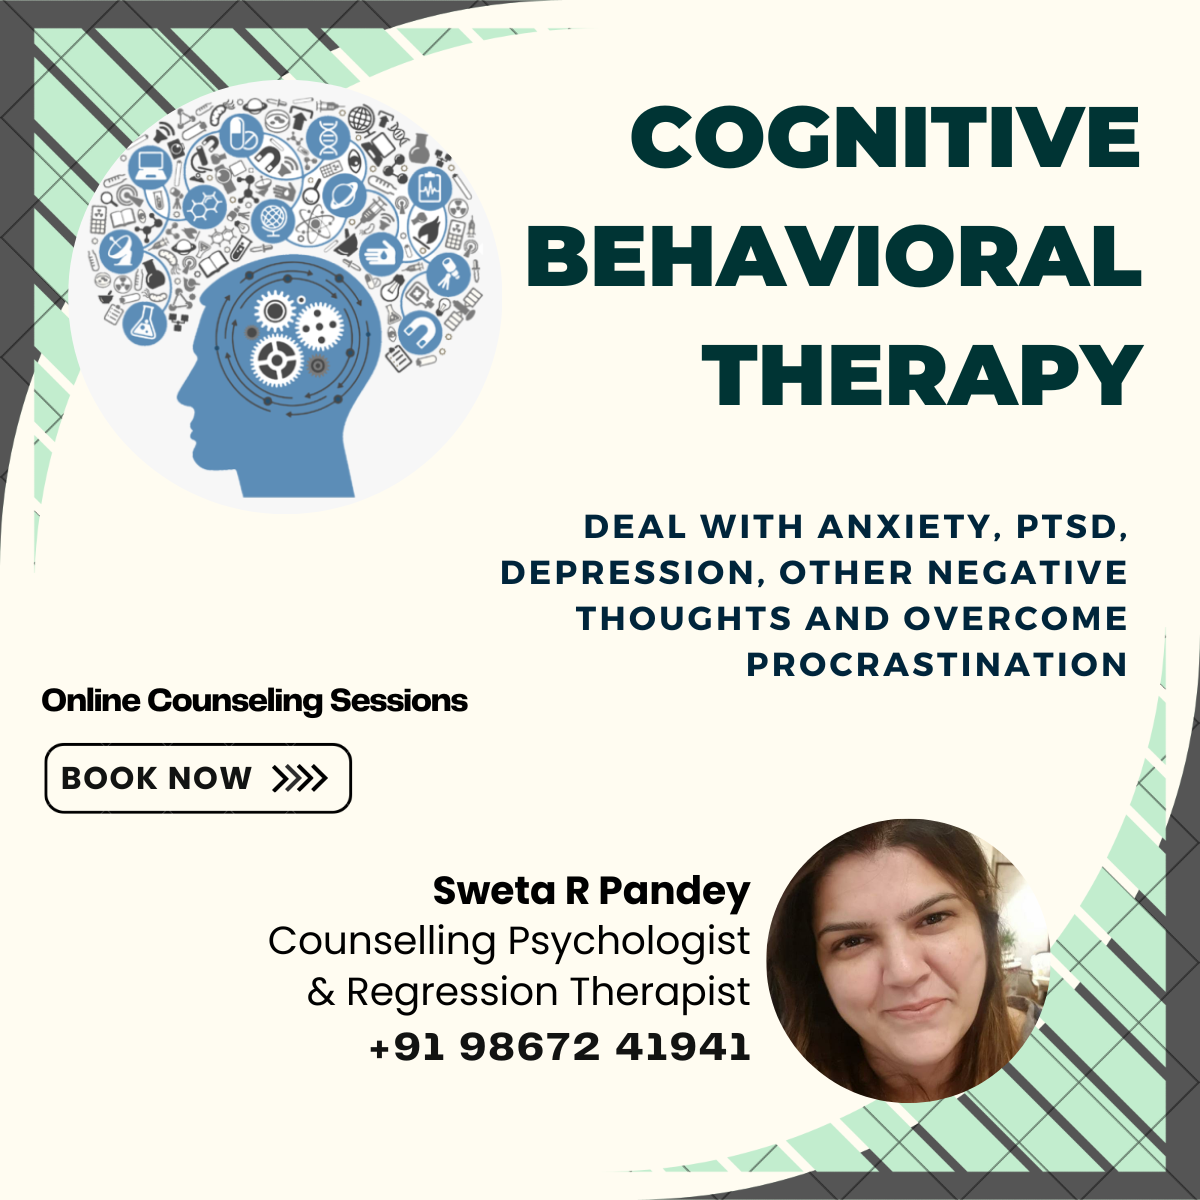 Sweta R Pandey - Cognitive Behavioral Therapy - Hyderabad